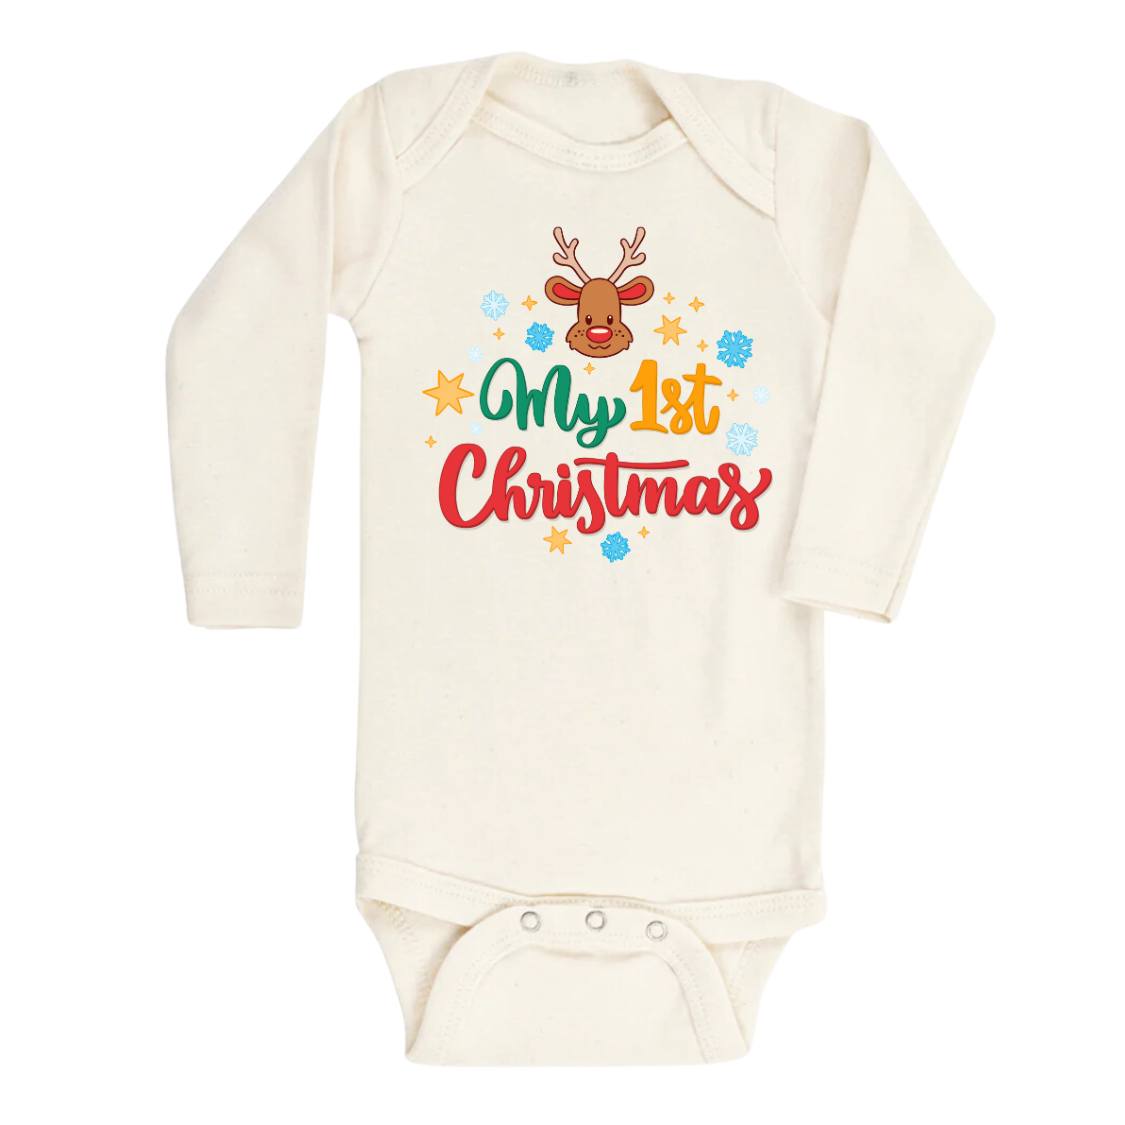 Cute Christmas Baby Onesie® My First Christmas Baby Natural Baby Clothes for Newborn Baby Announcement Christmas Gift